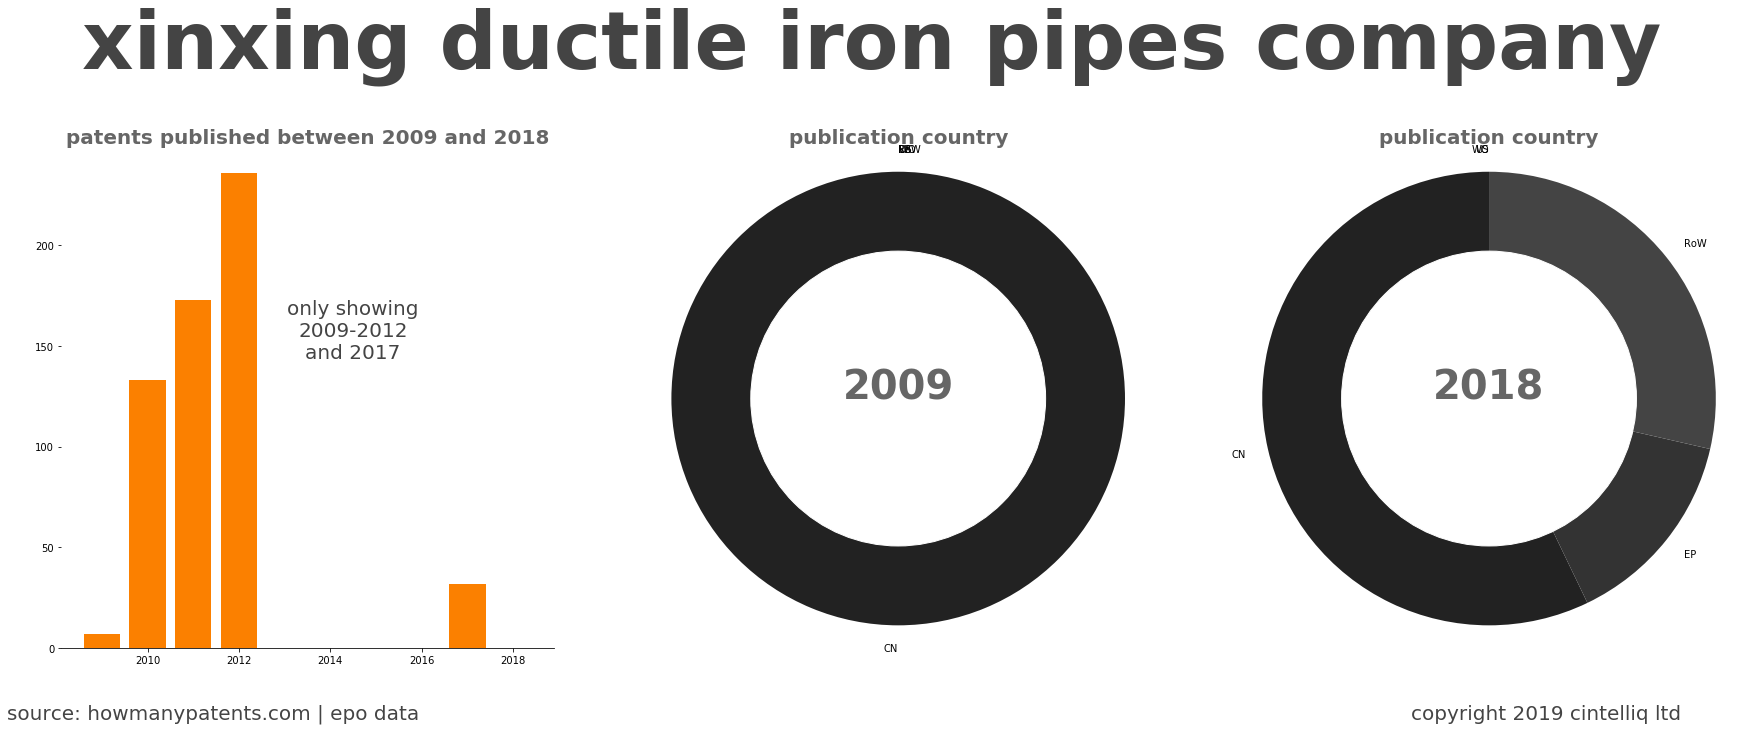 summary of patents for Xinxing Ductile Iron Pipes Company